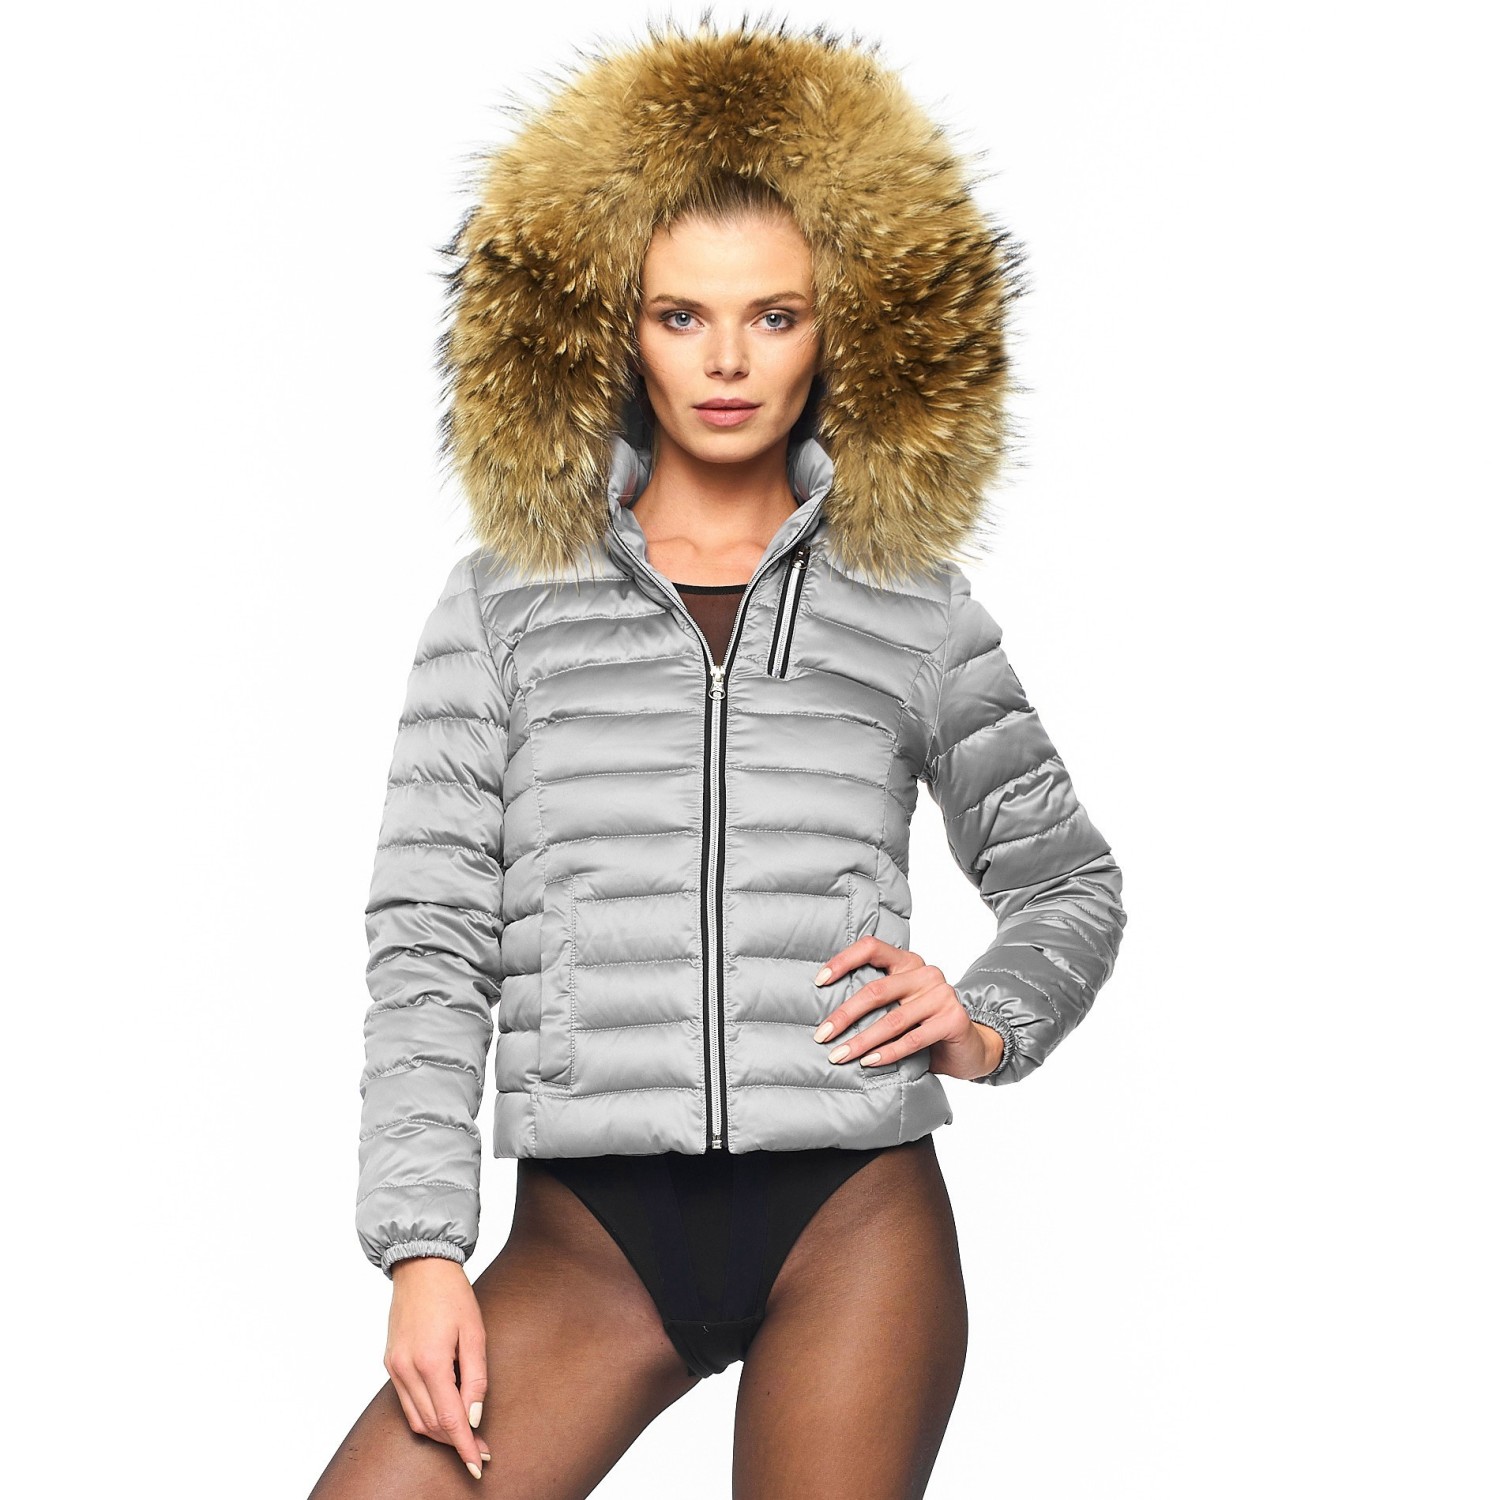 Down jacket with fur hood “Majestic Silver”